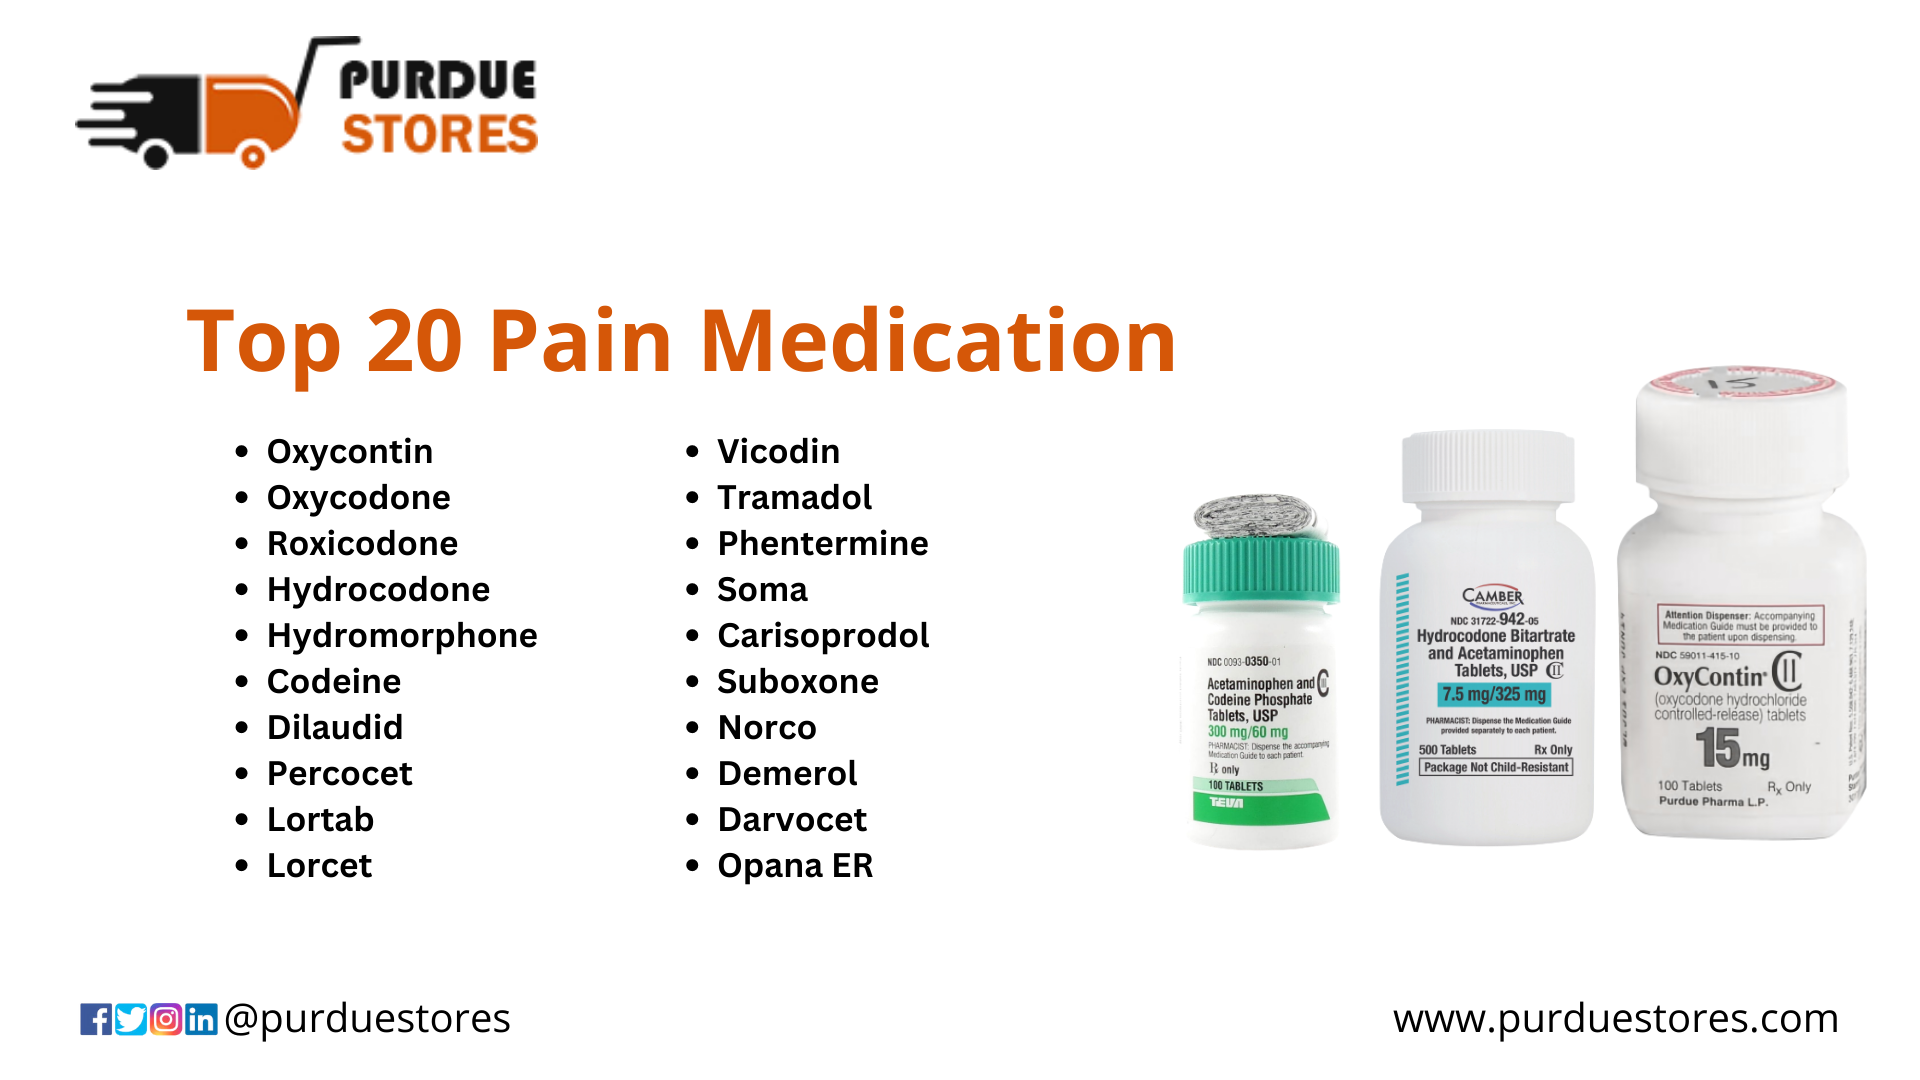 Top 20 Pain Medication: Uses & Types